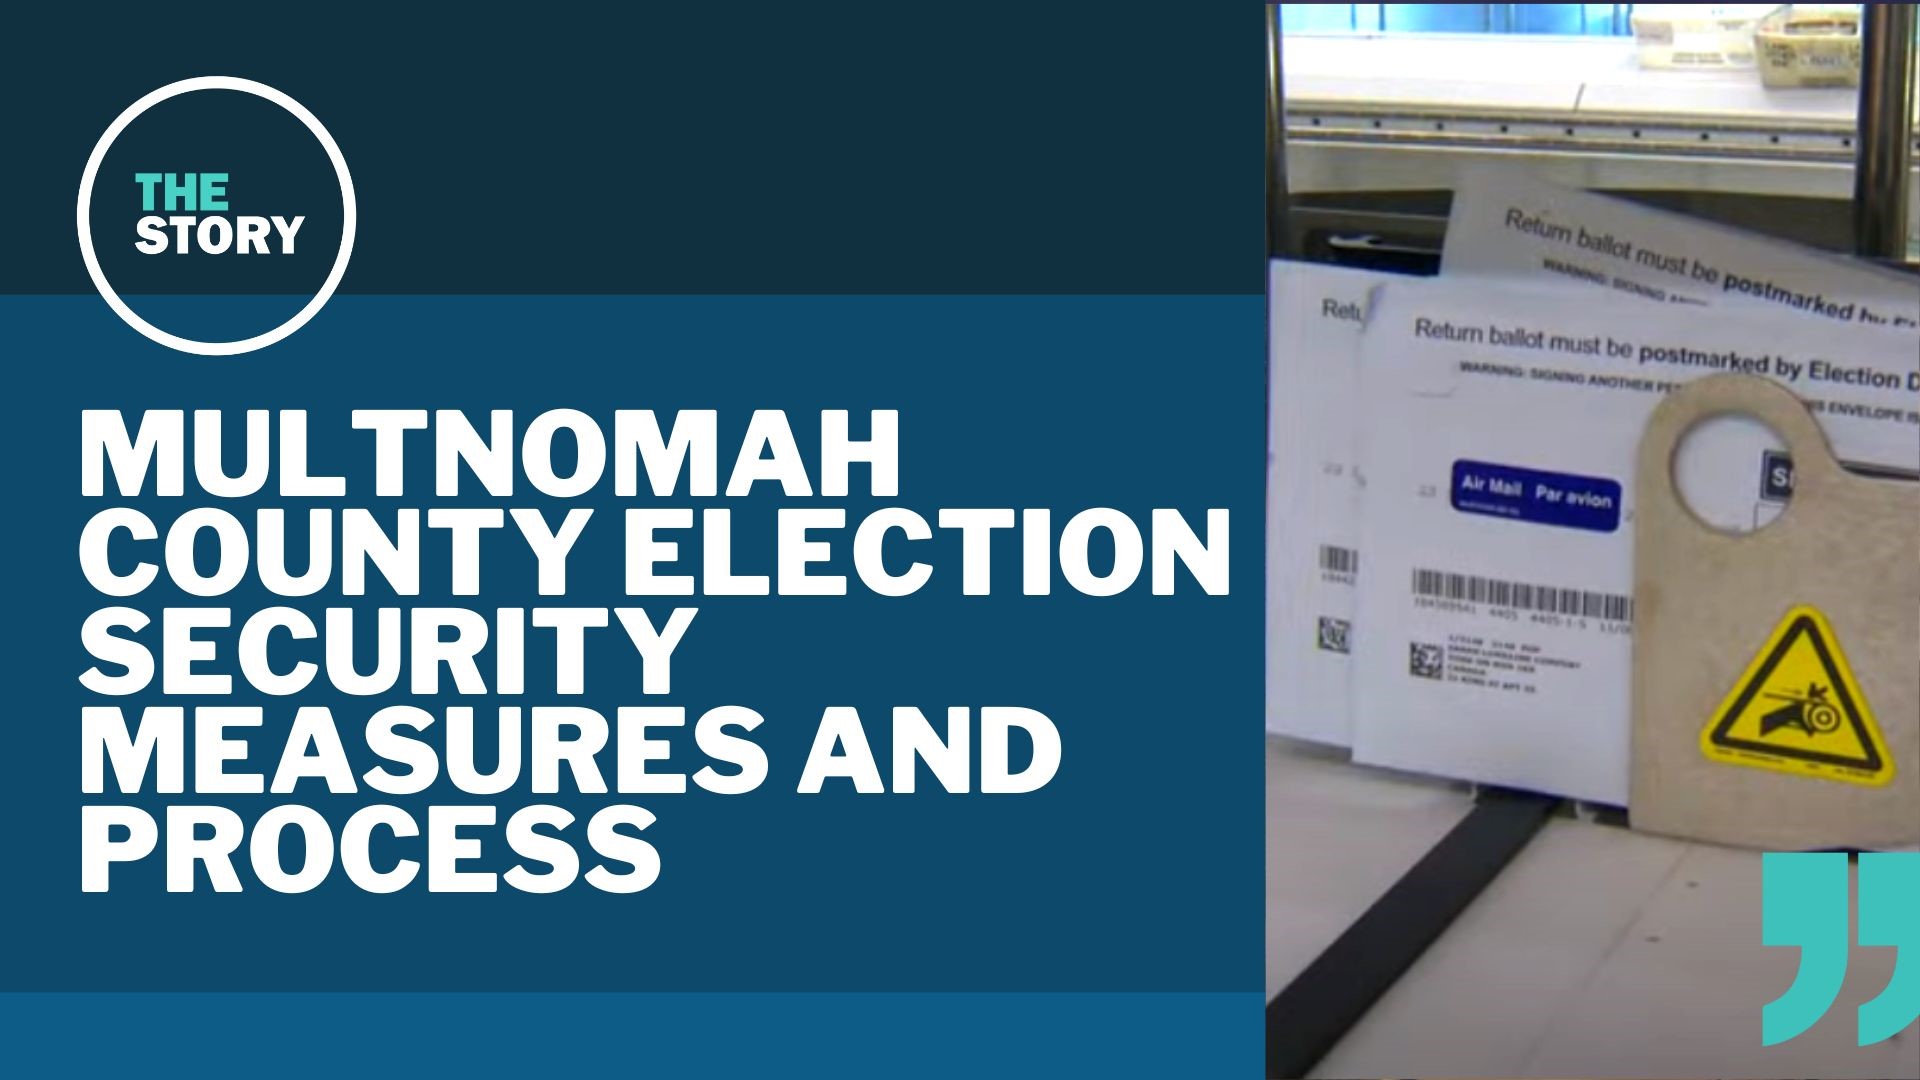 We head to the Multnomah County election HQ where elections Director Tim Scott shows us around and talks about what happens to your ballot once it arrives.